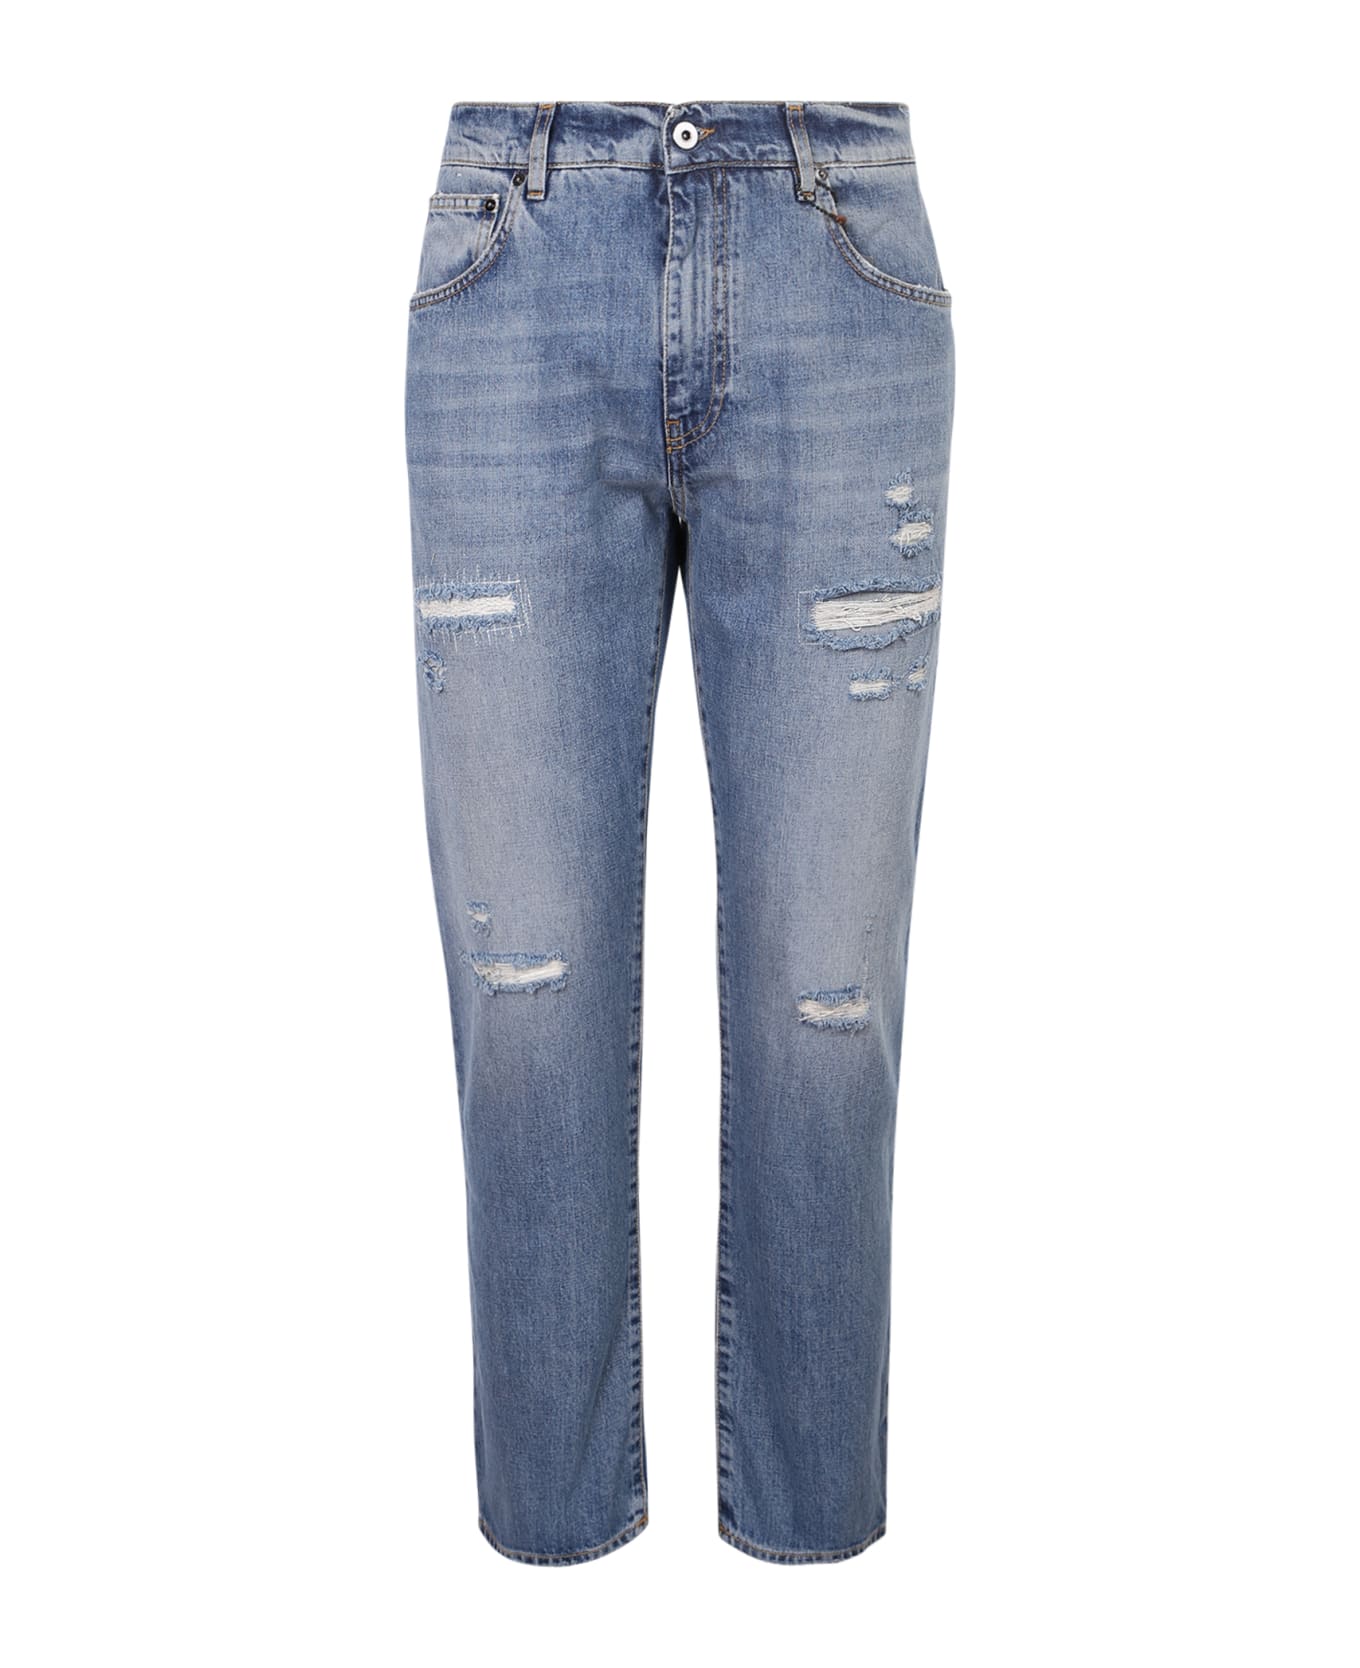 14 Bros Ripped Effect Jeans - Blue デニム